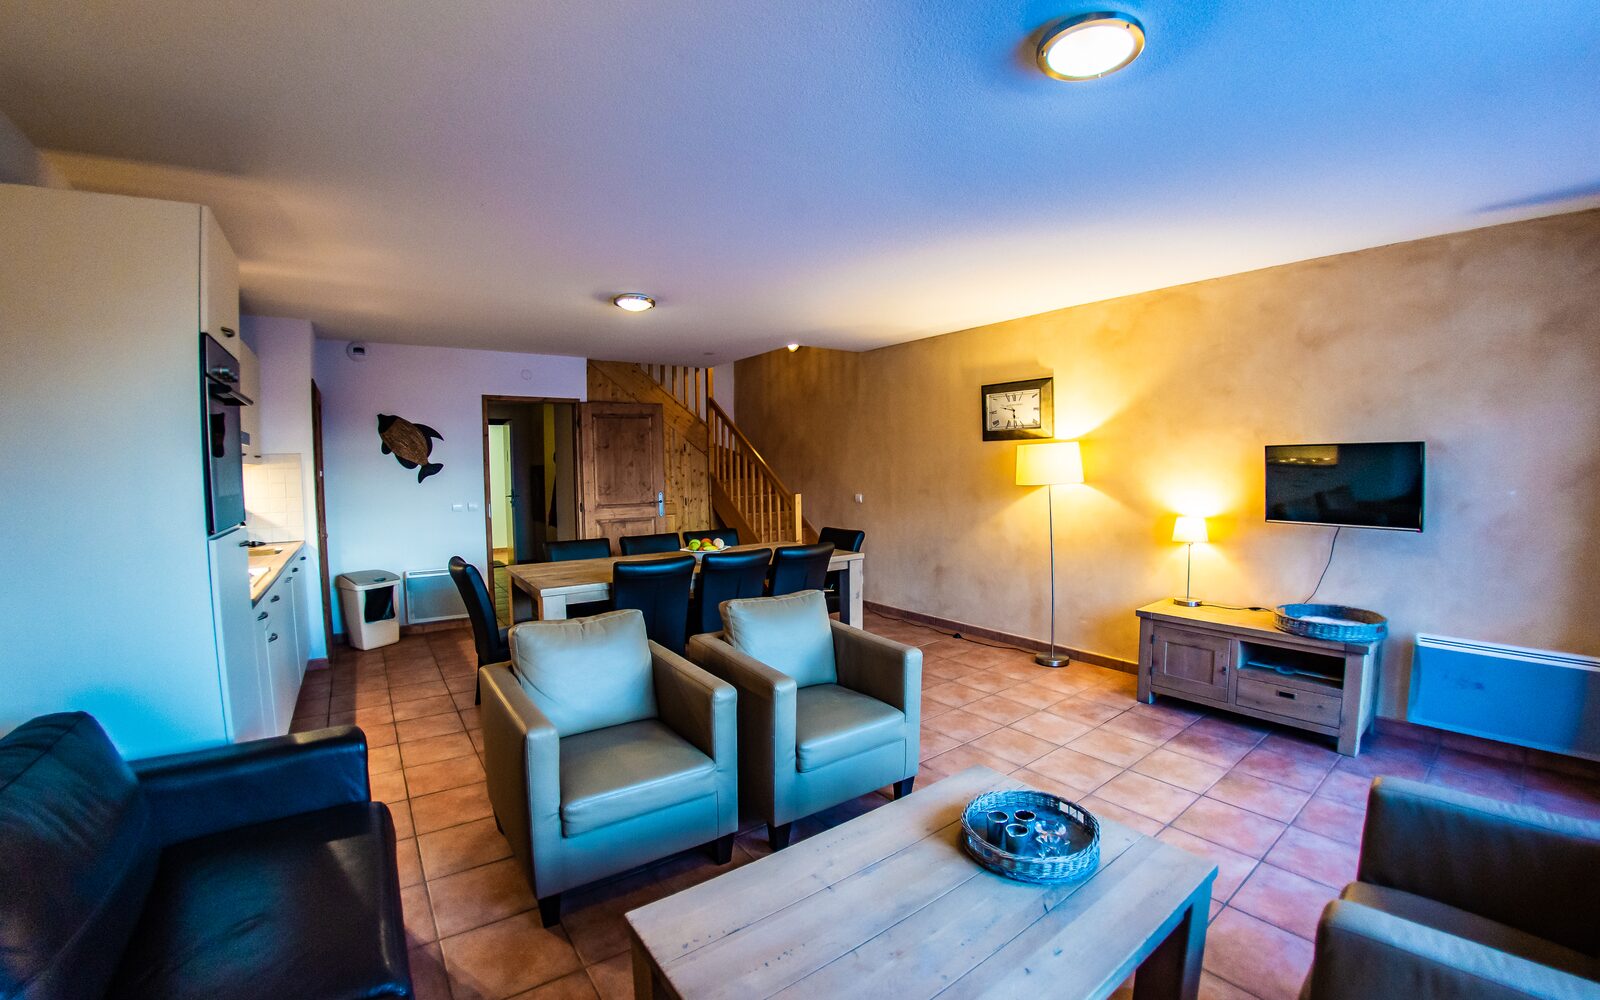 Apartment on the pistes